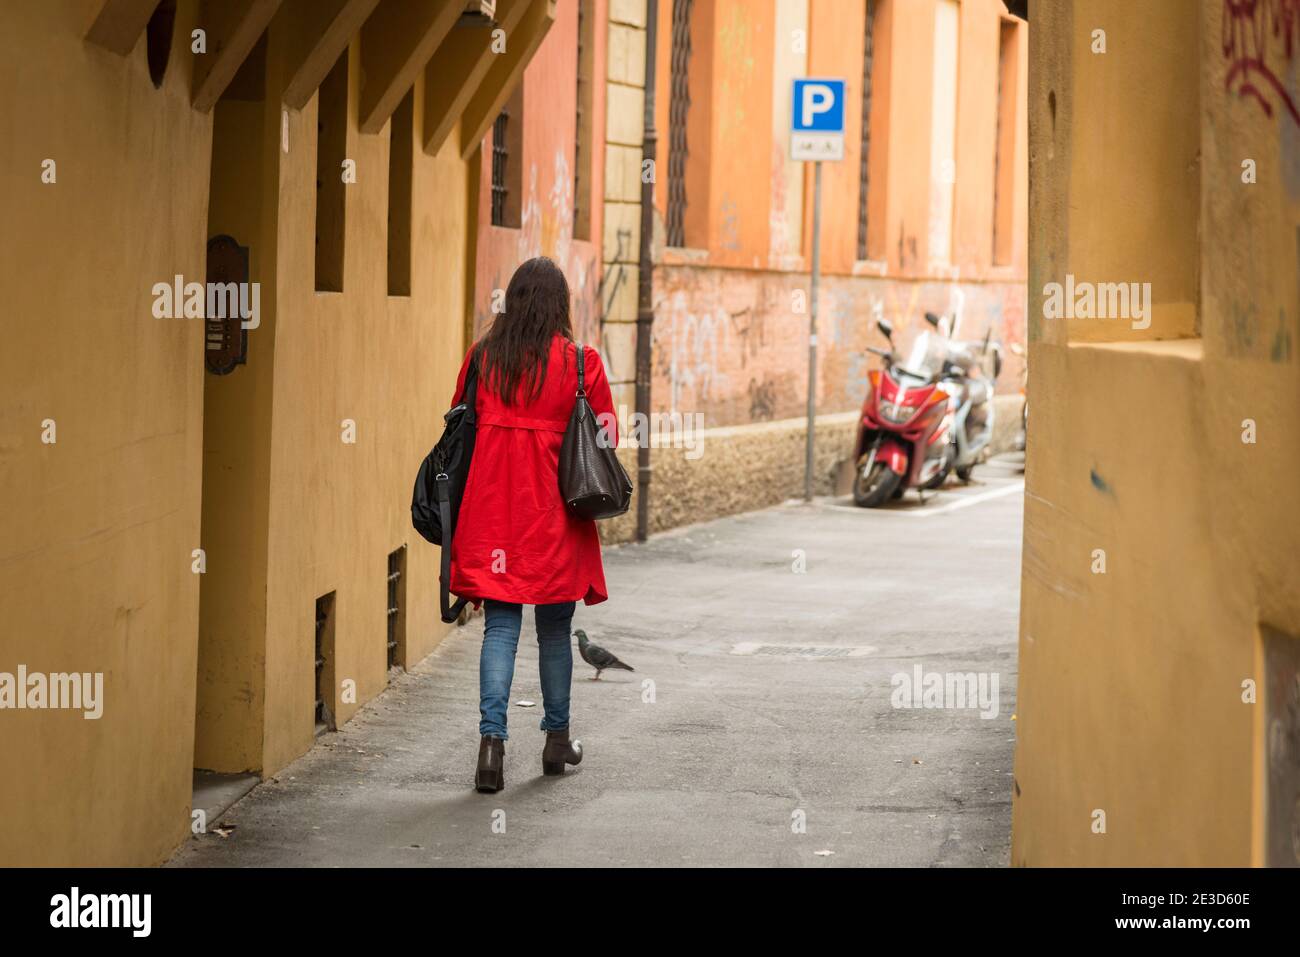 A woman in a red coat walks down a narrow street in Bologna Italy Stock Photo